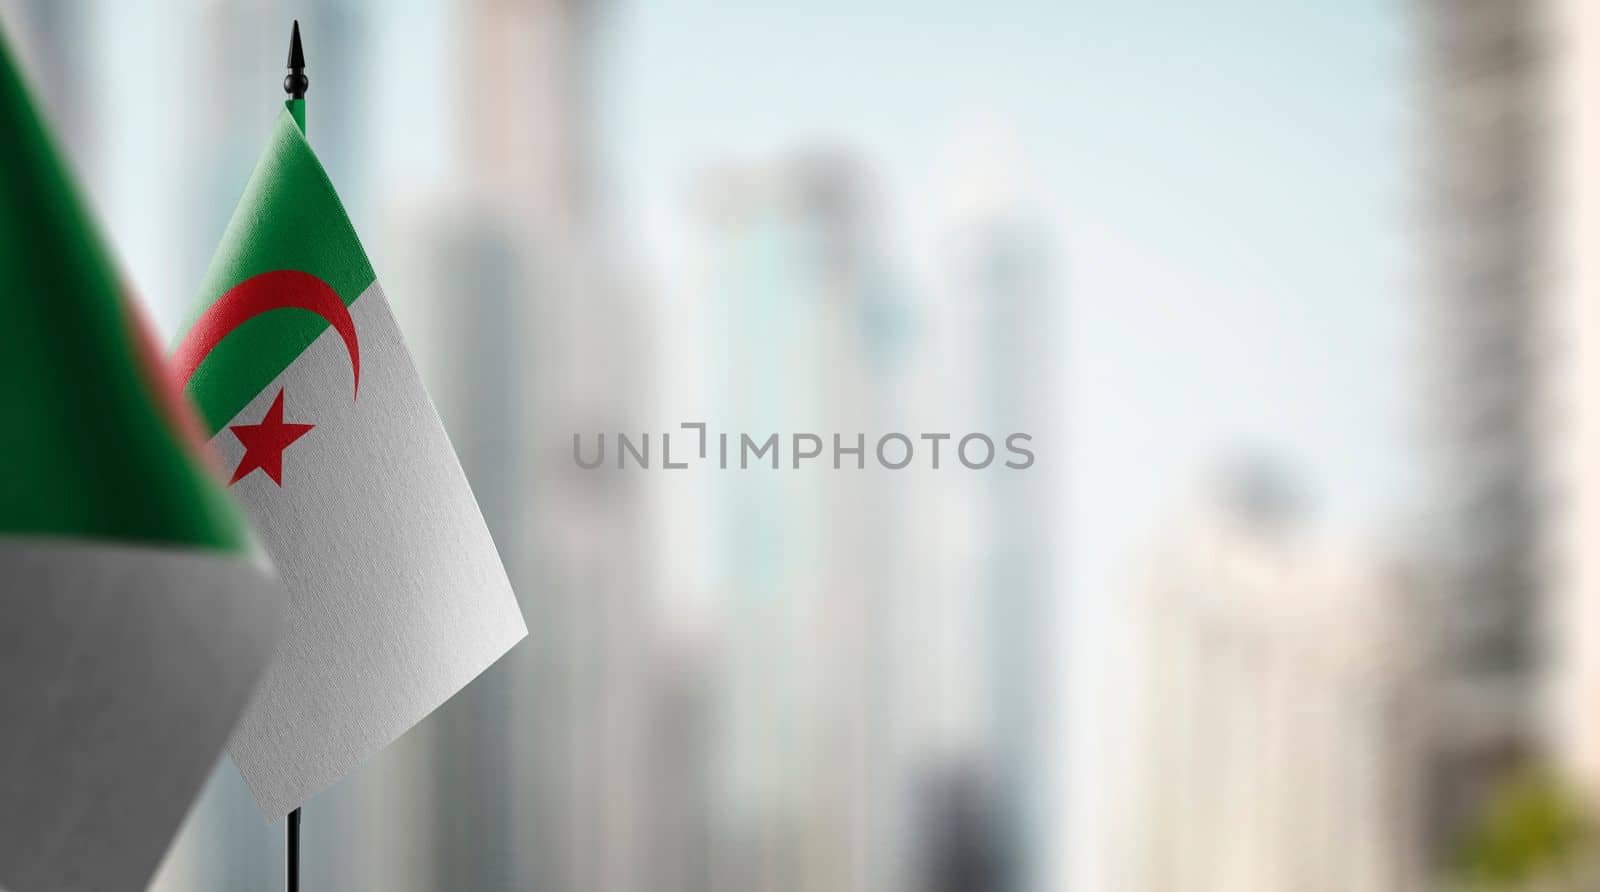 Small flags of the Algeria on an abstract blurry background.